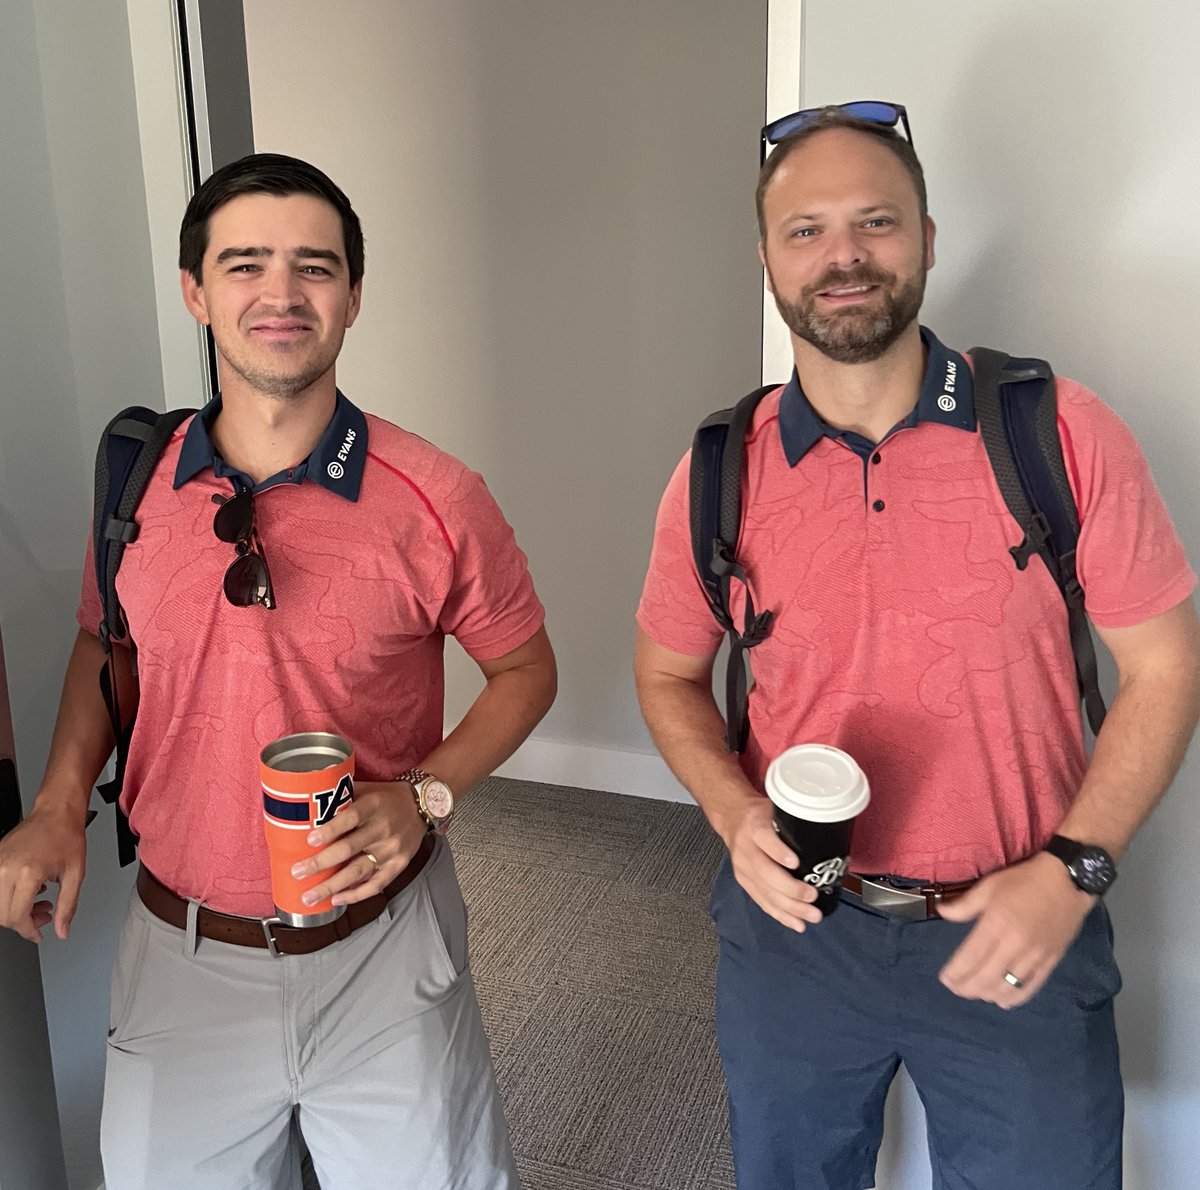 We recently held a Key Account Management training week where Travis West (right) and Spencer Walker (left) selfishly did not share the salmon shirt memo with the rest of us. #twinning #salmonshirtday #EvansExperience #EX